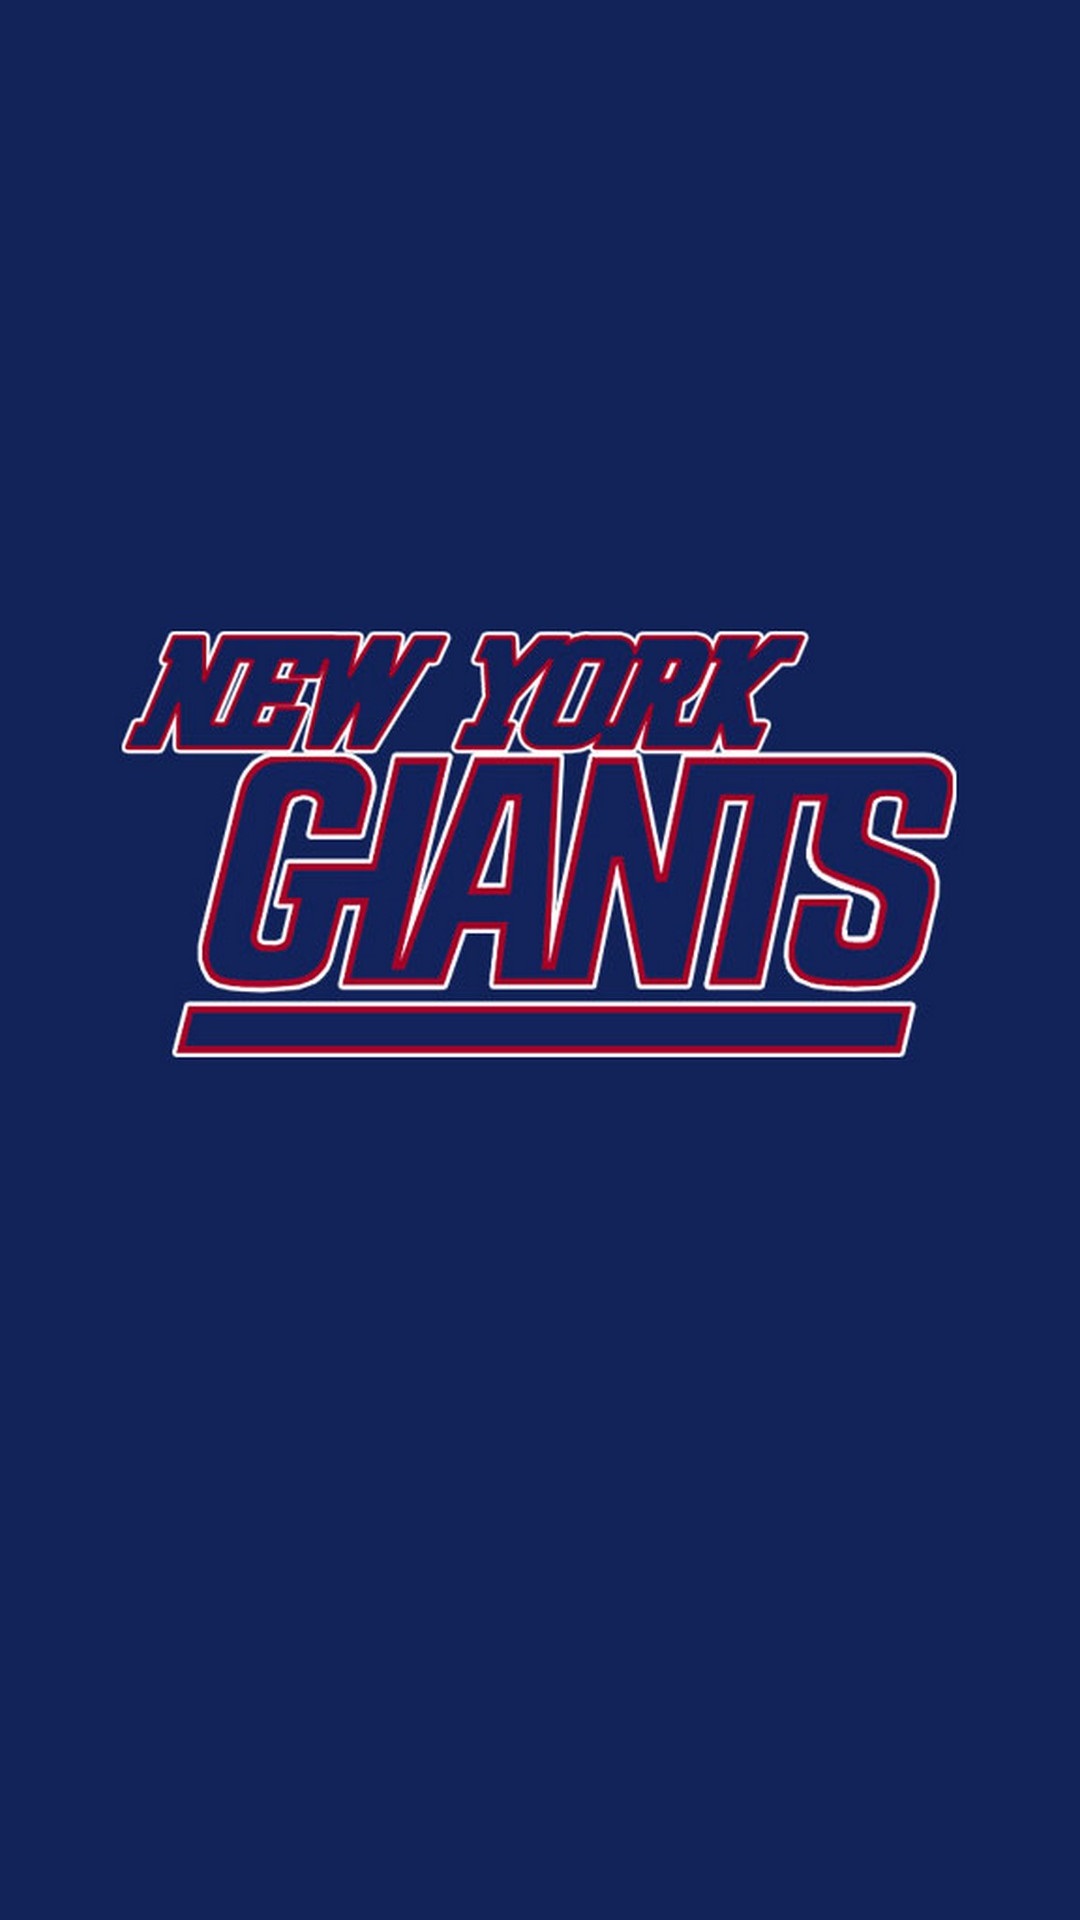 New York Giants iPhone Wallpaper High Quality with high-resolution 1080x1920 pixel. Donwload and set as wallpaper for your iPhone X, iPhone XS home screen backgrounds, XS Max, XR, iPhone8 lock screen wallpaper, iPhone 7, 6, SE and other mobile devices